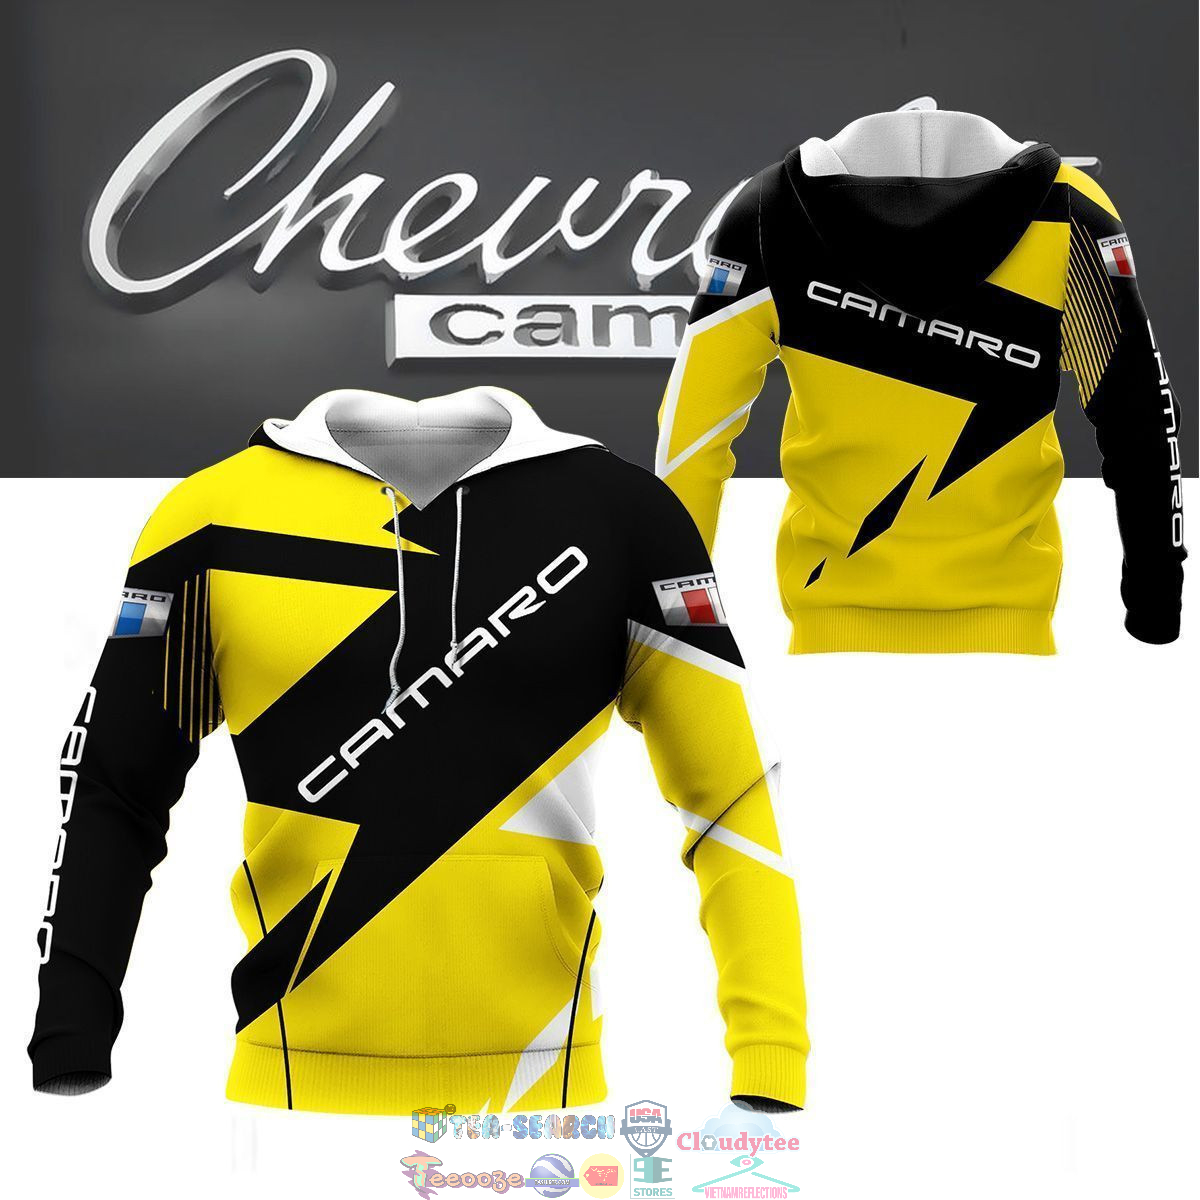 Chevrolet Camaro ver 15 3D hoodie and t-shirt